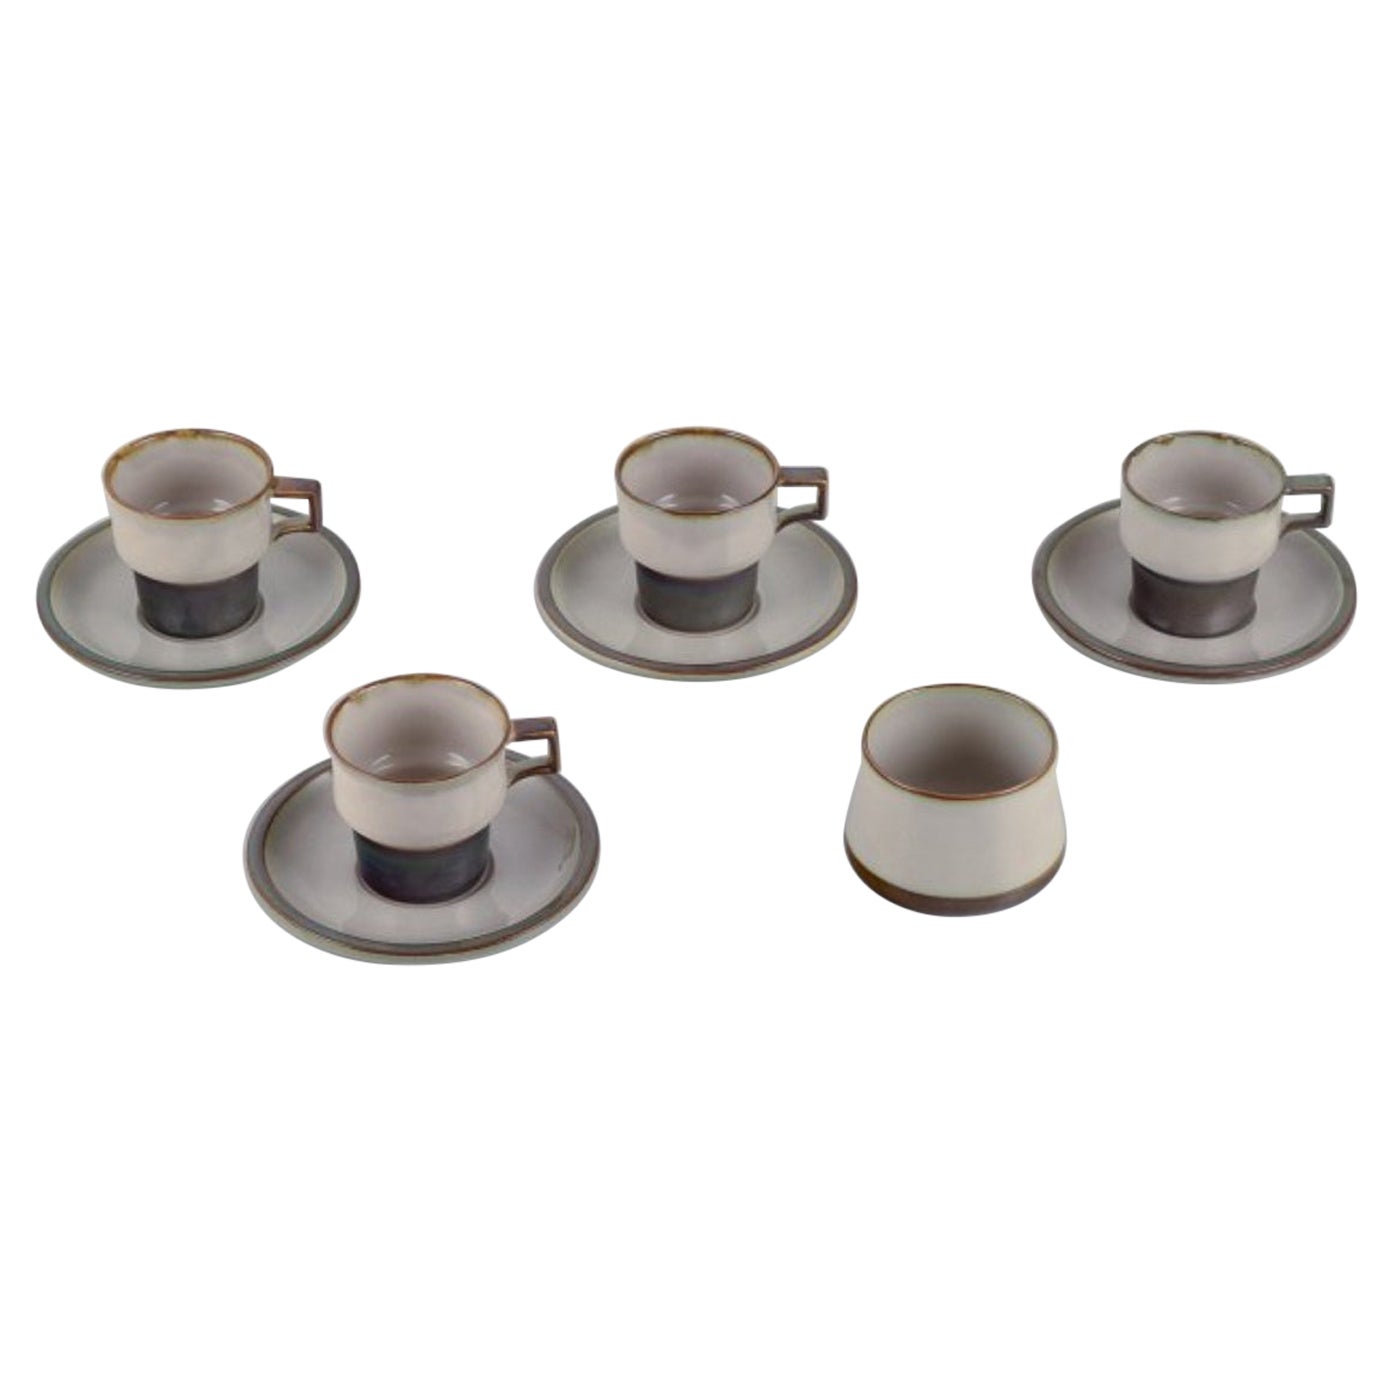 Bing & Grøndahl. Four sets of Tema coffee cups with saucers and a sugar bowl